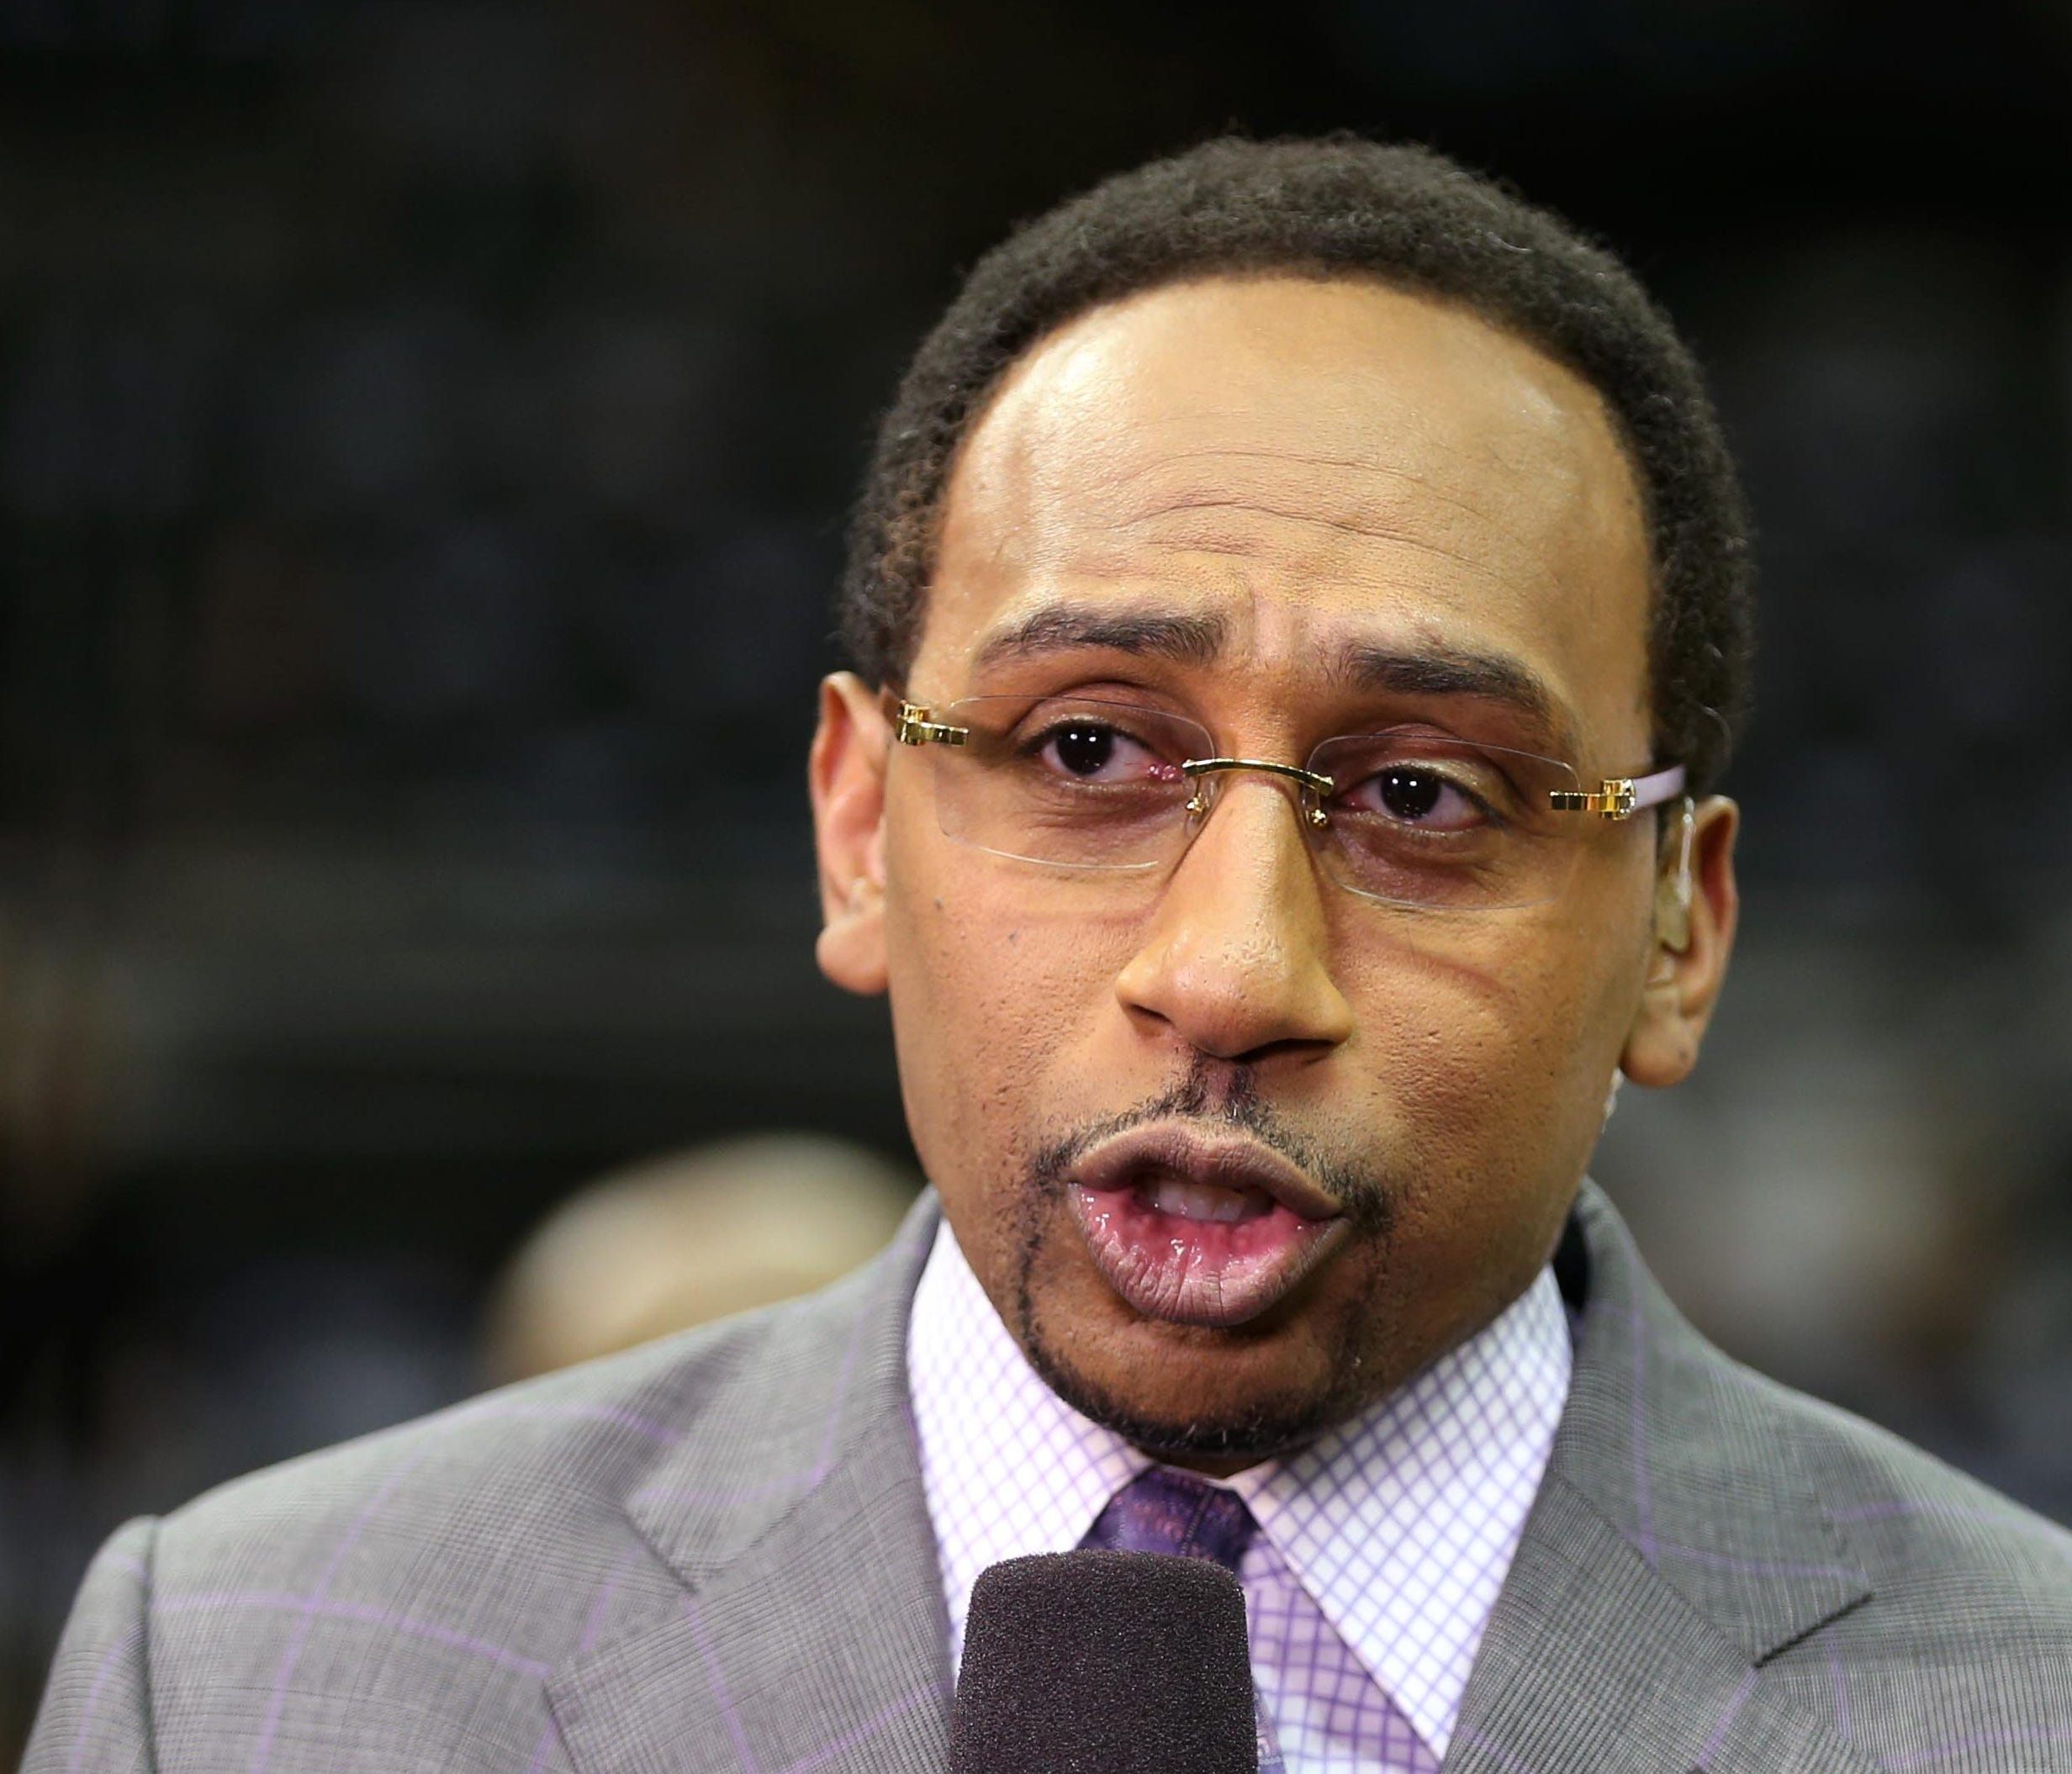 Jun 15, 2014; San Antonio, TX, USA; ESPN analyst Stephen A. Smith before game five of the 2014 NBA Finals between the San Antonio Spurs and the Miami Heat at AT&T Center. Mandatory Credit: Soobum Im-USA TODAY Sports ORG XMIT: USATSI-181090 ORIG F